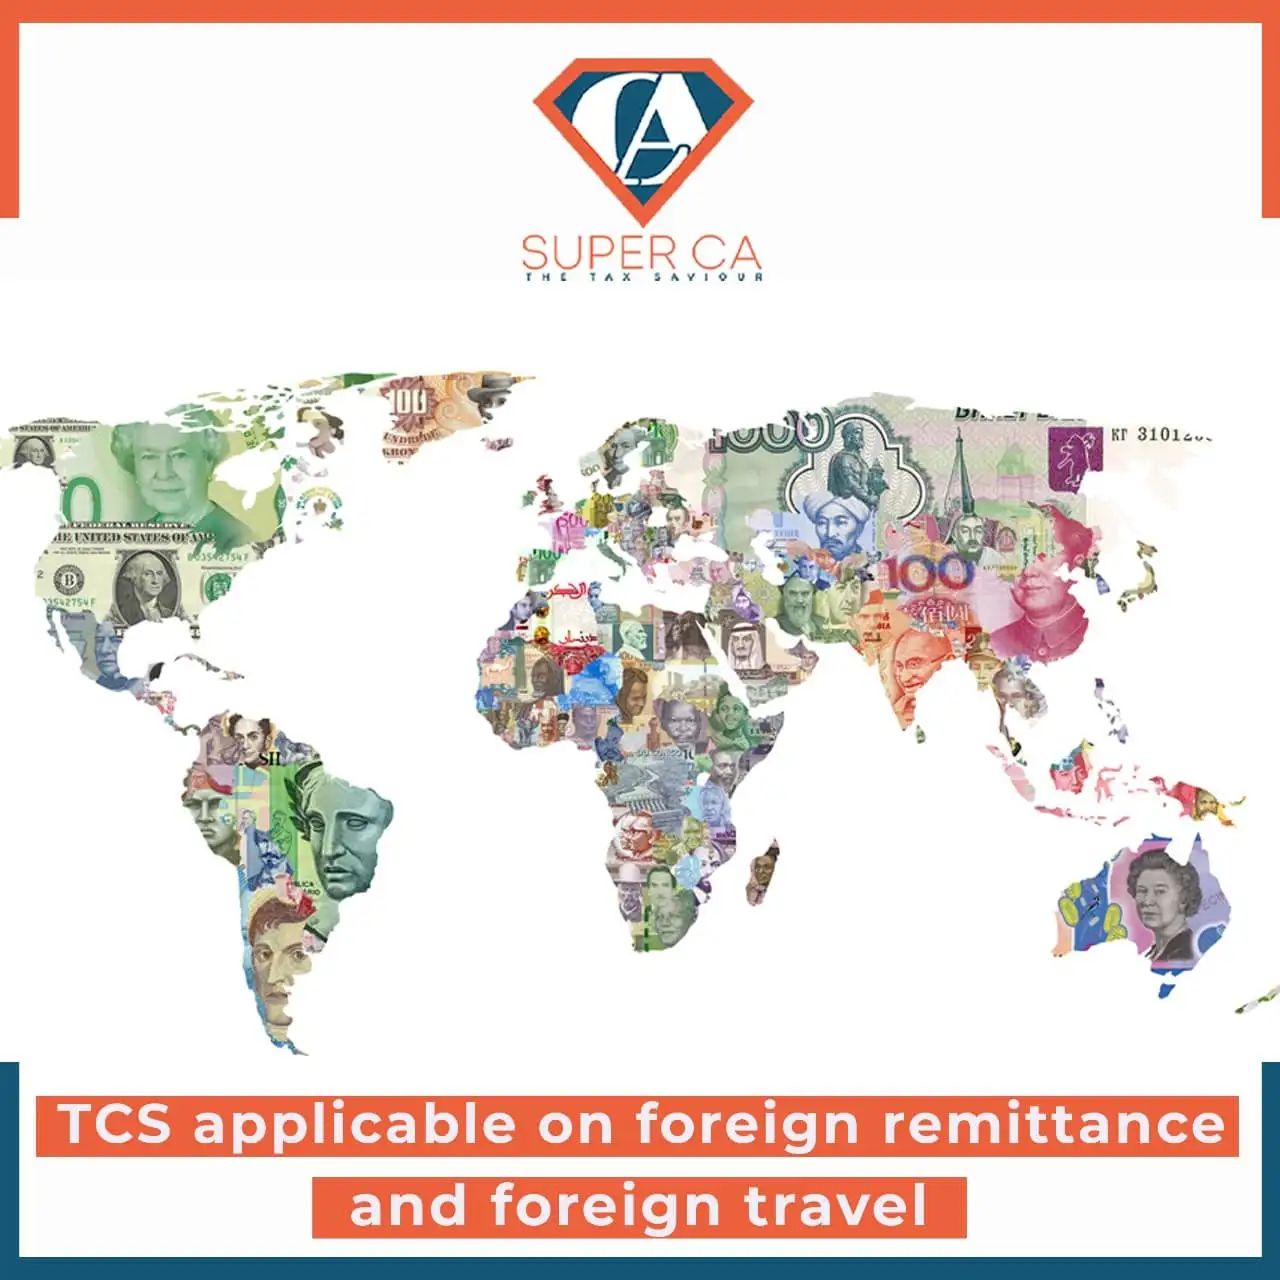 TCS applicable on foreign remittance and foreign travel